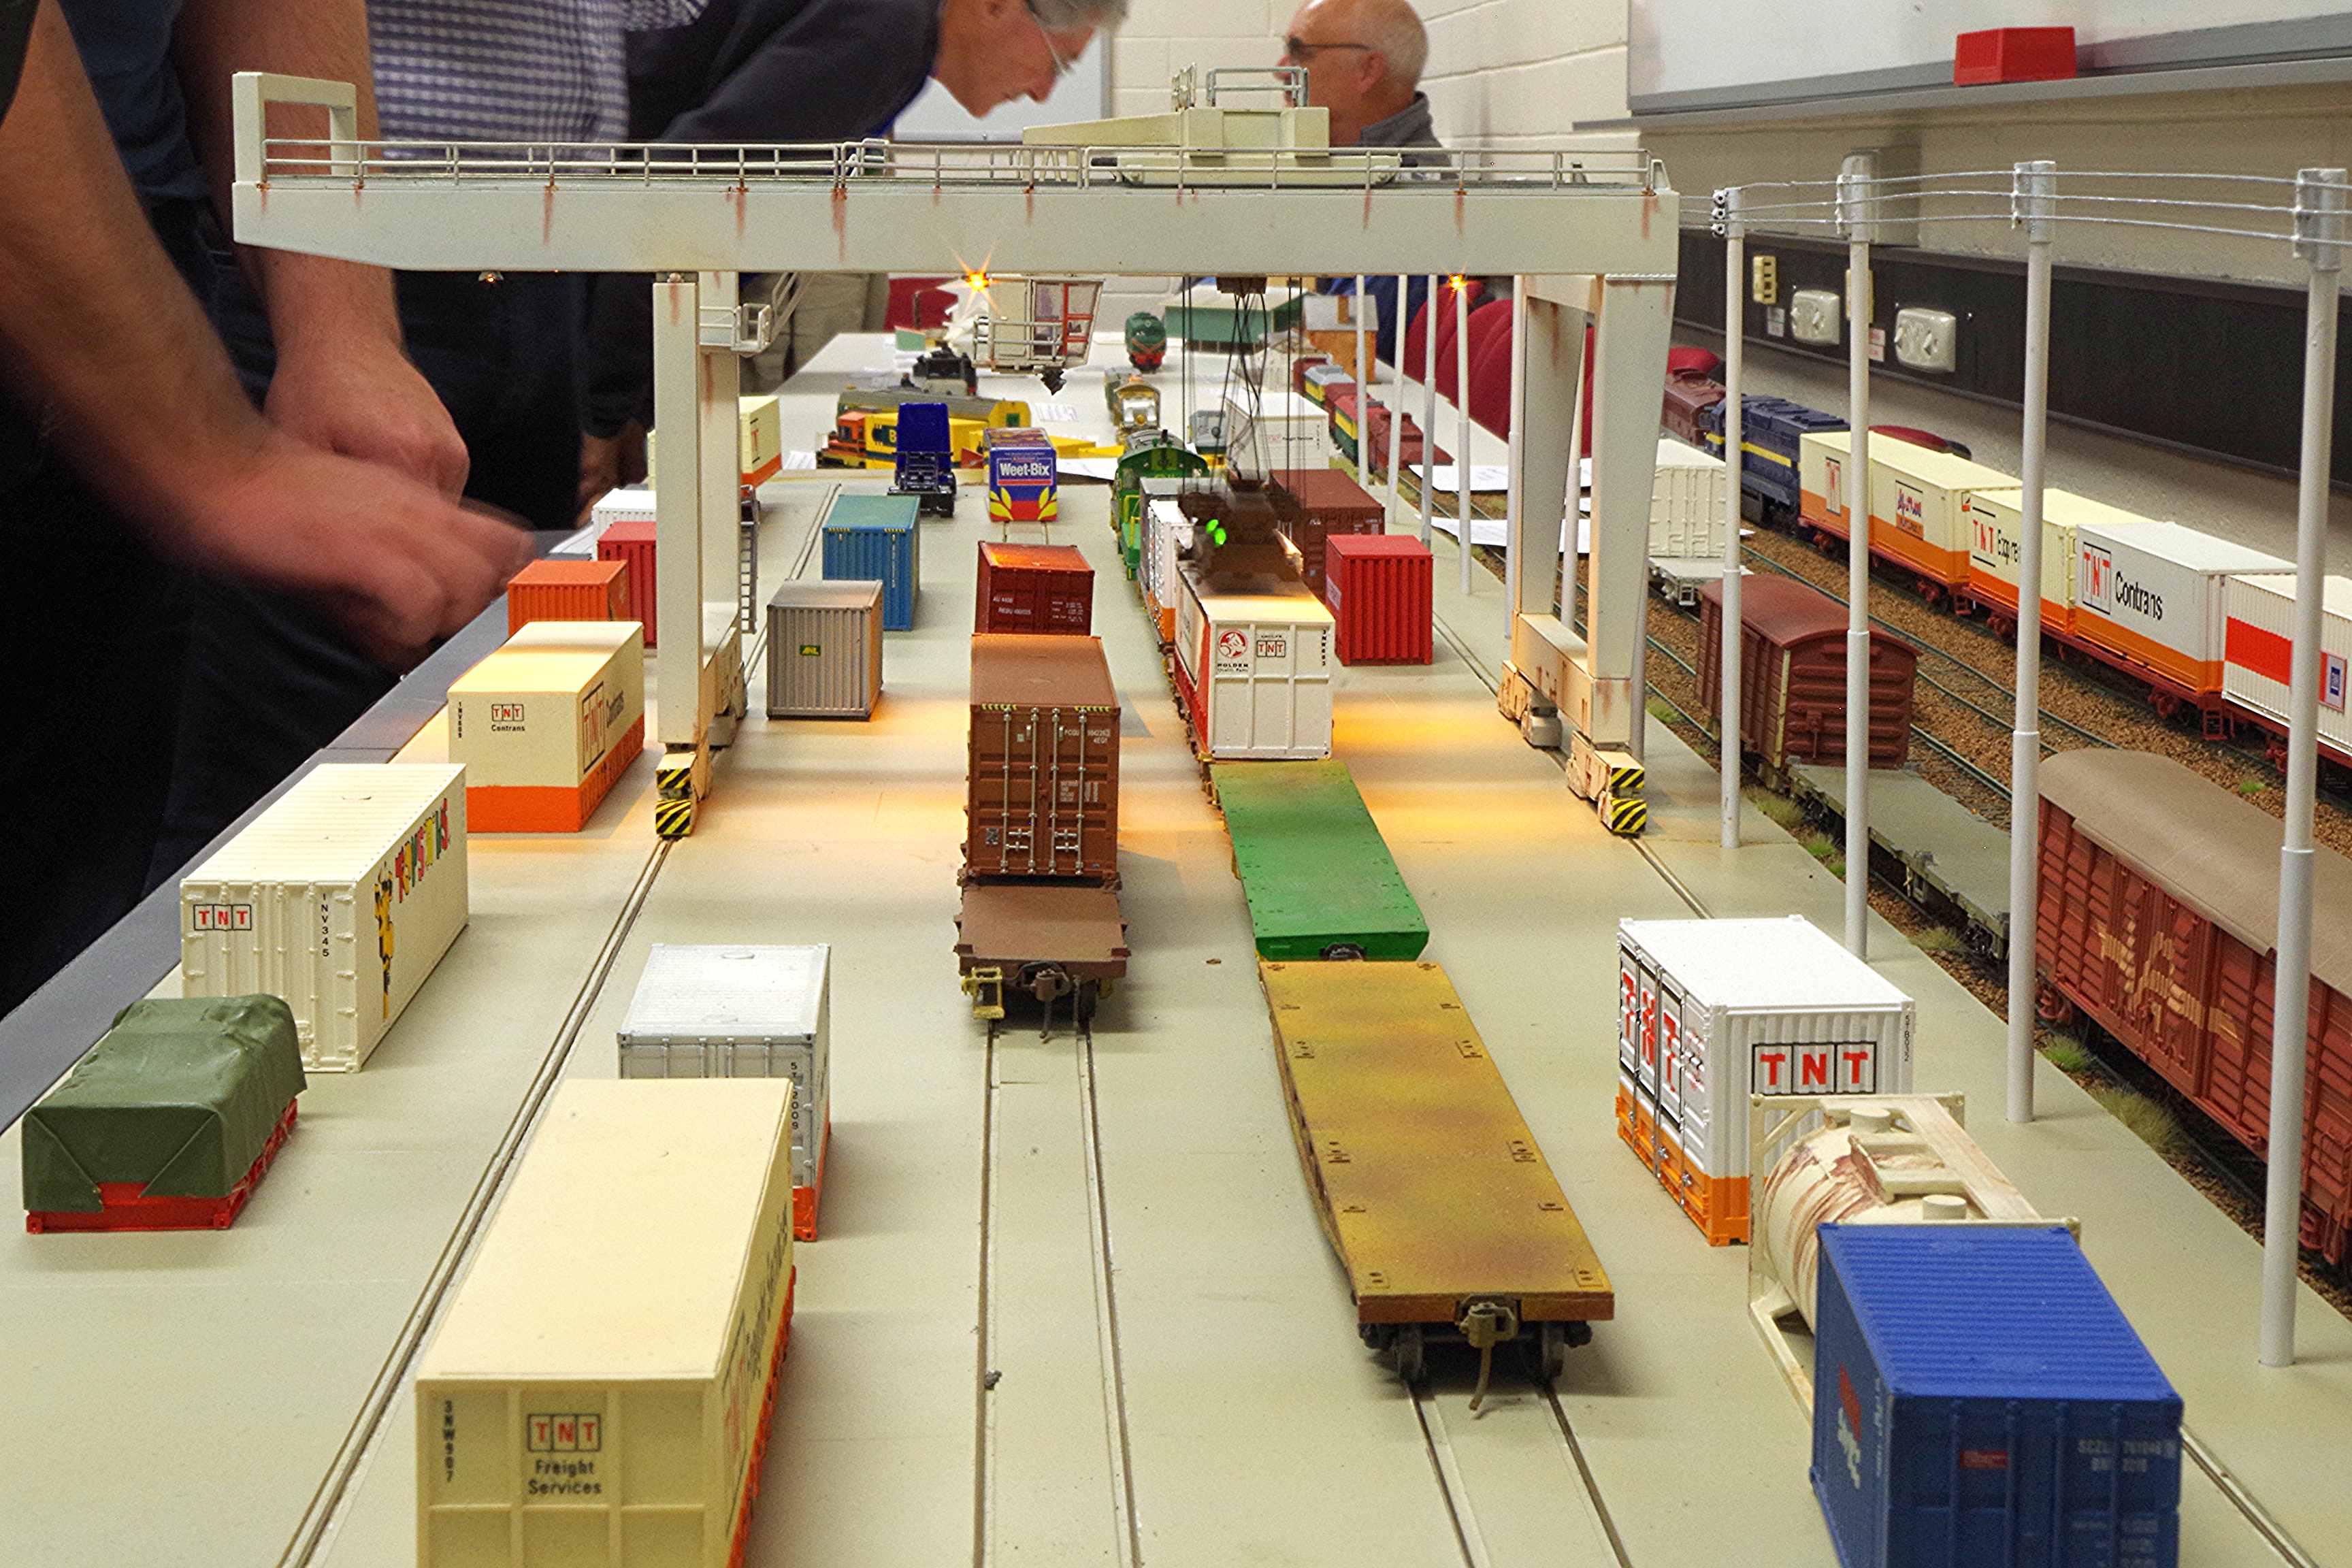 HO scale model of the TNT Terminal yard and container gantry